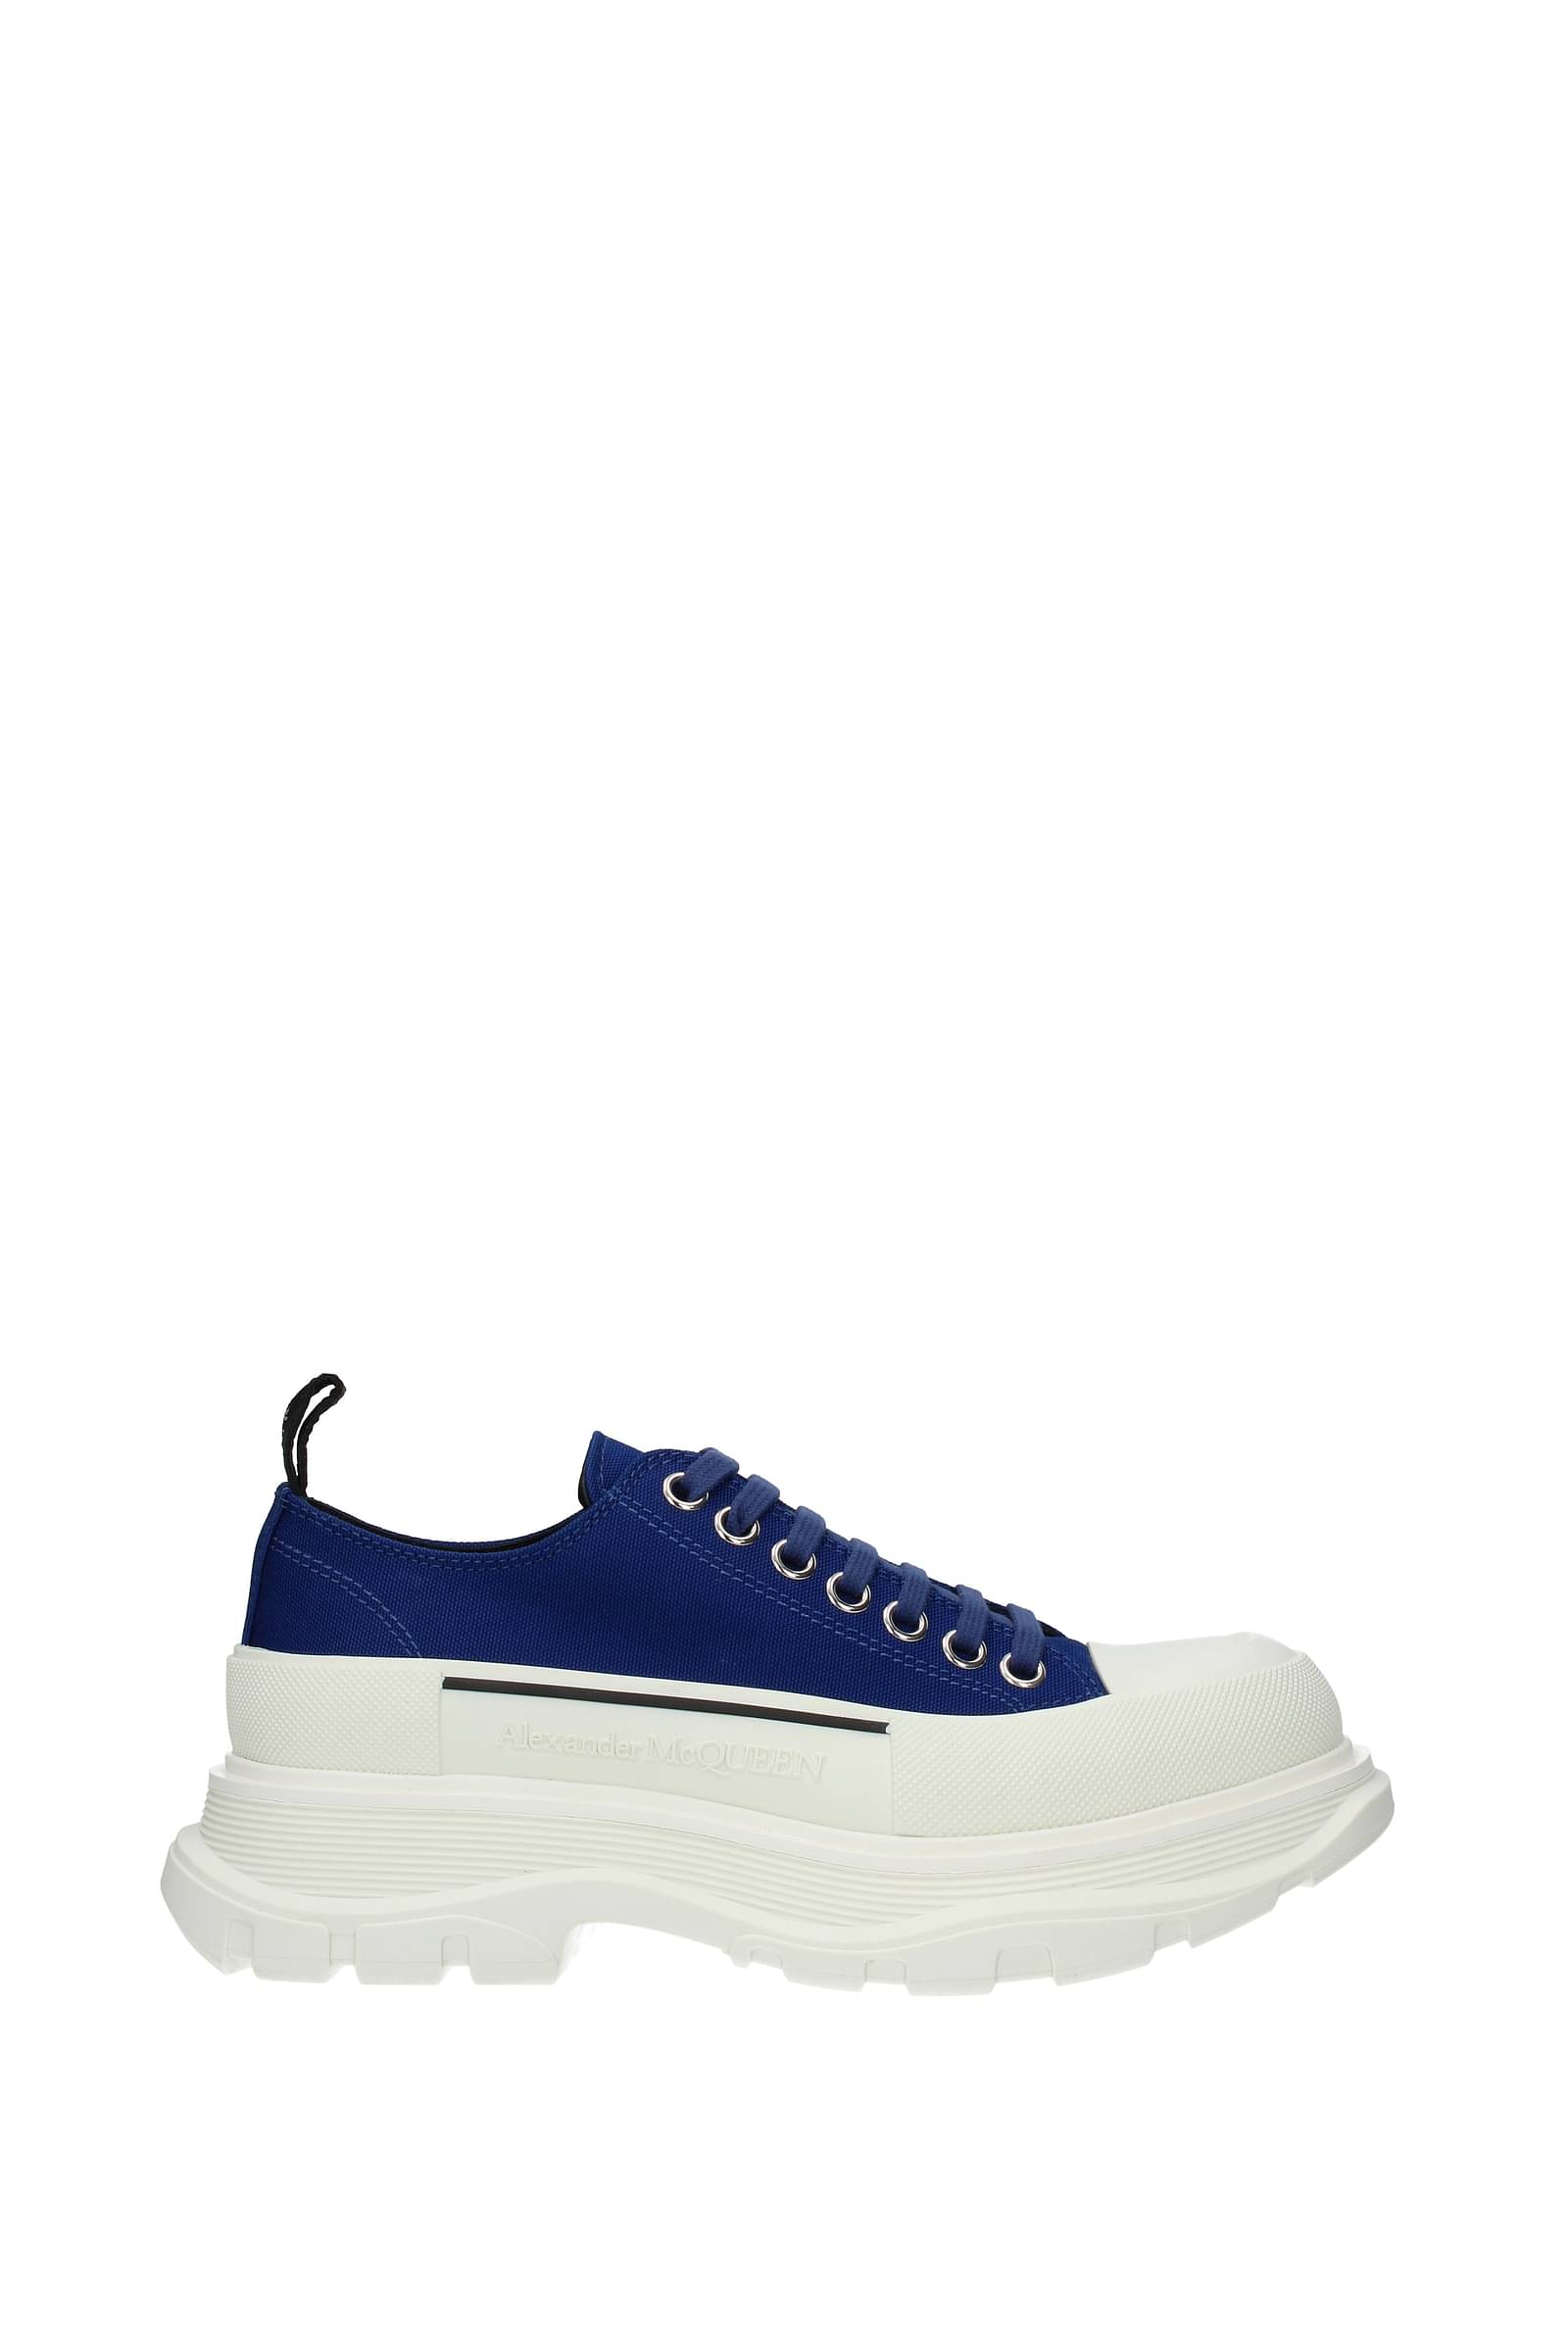 mcqueen sneakers outlet